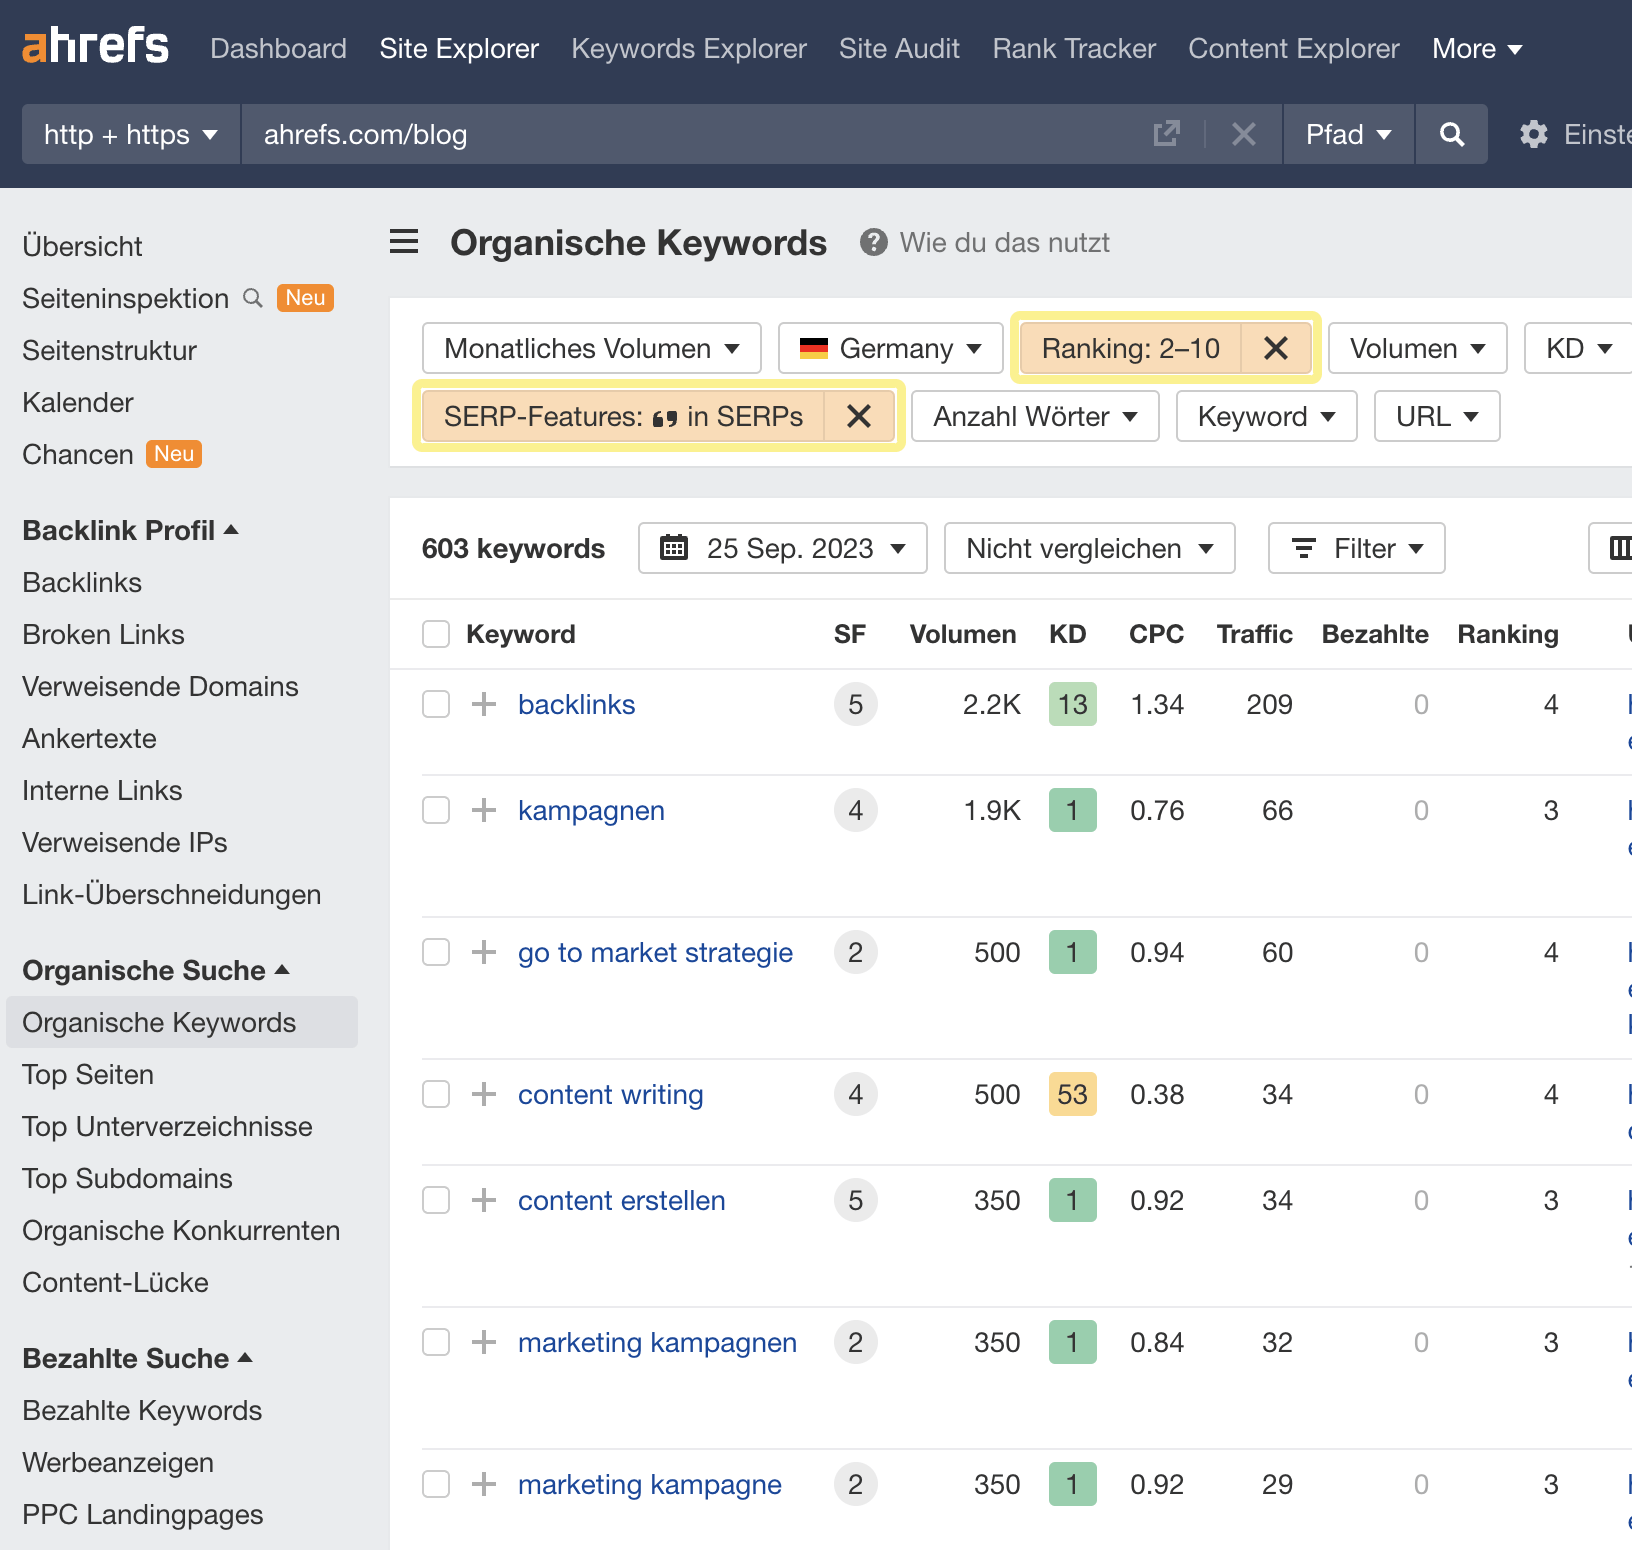 Finding featured snippet opportunities, via Ahrefs' Site Explorer